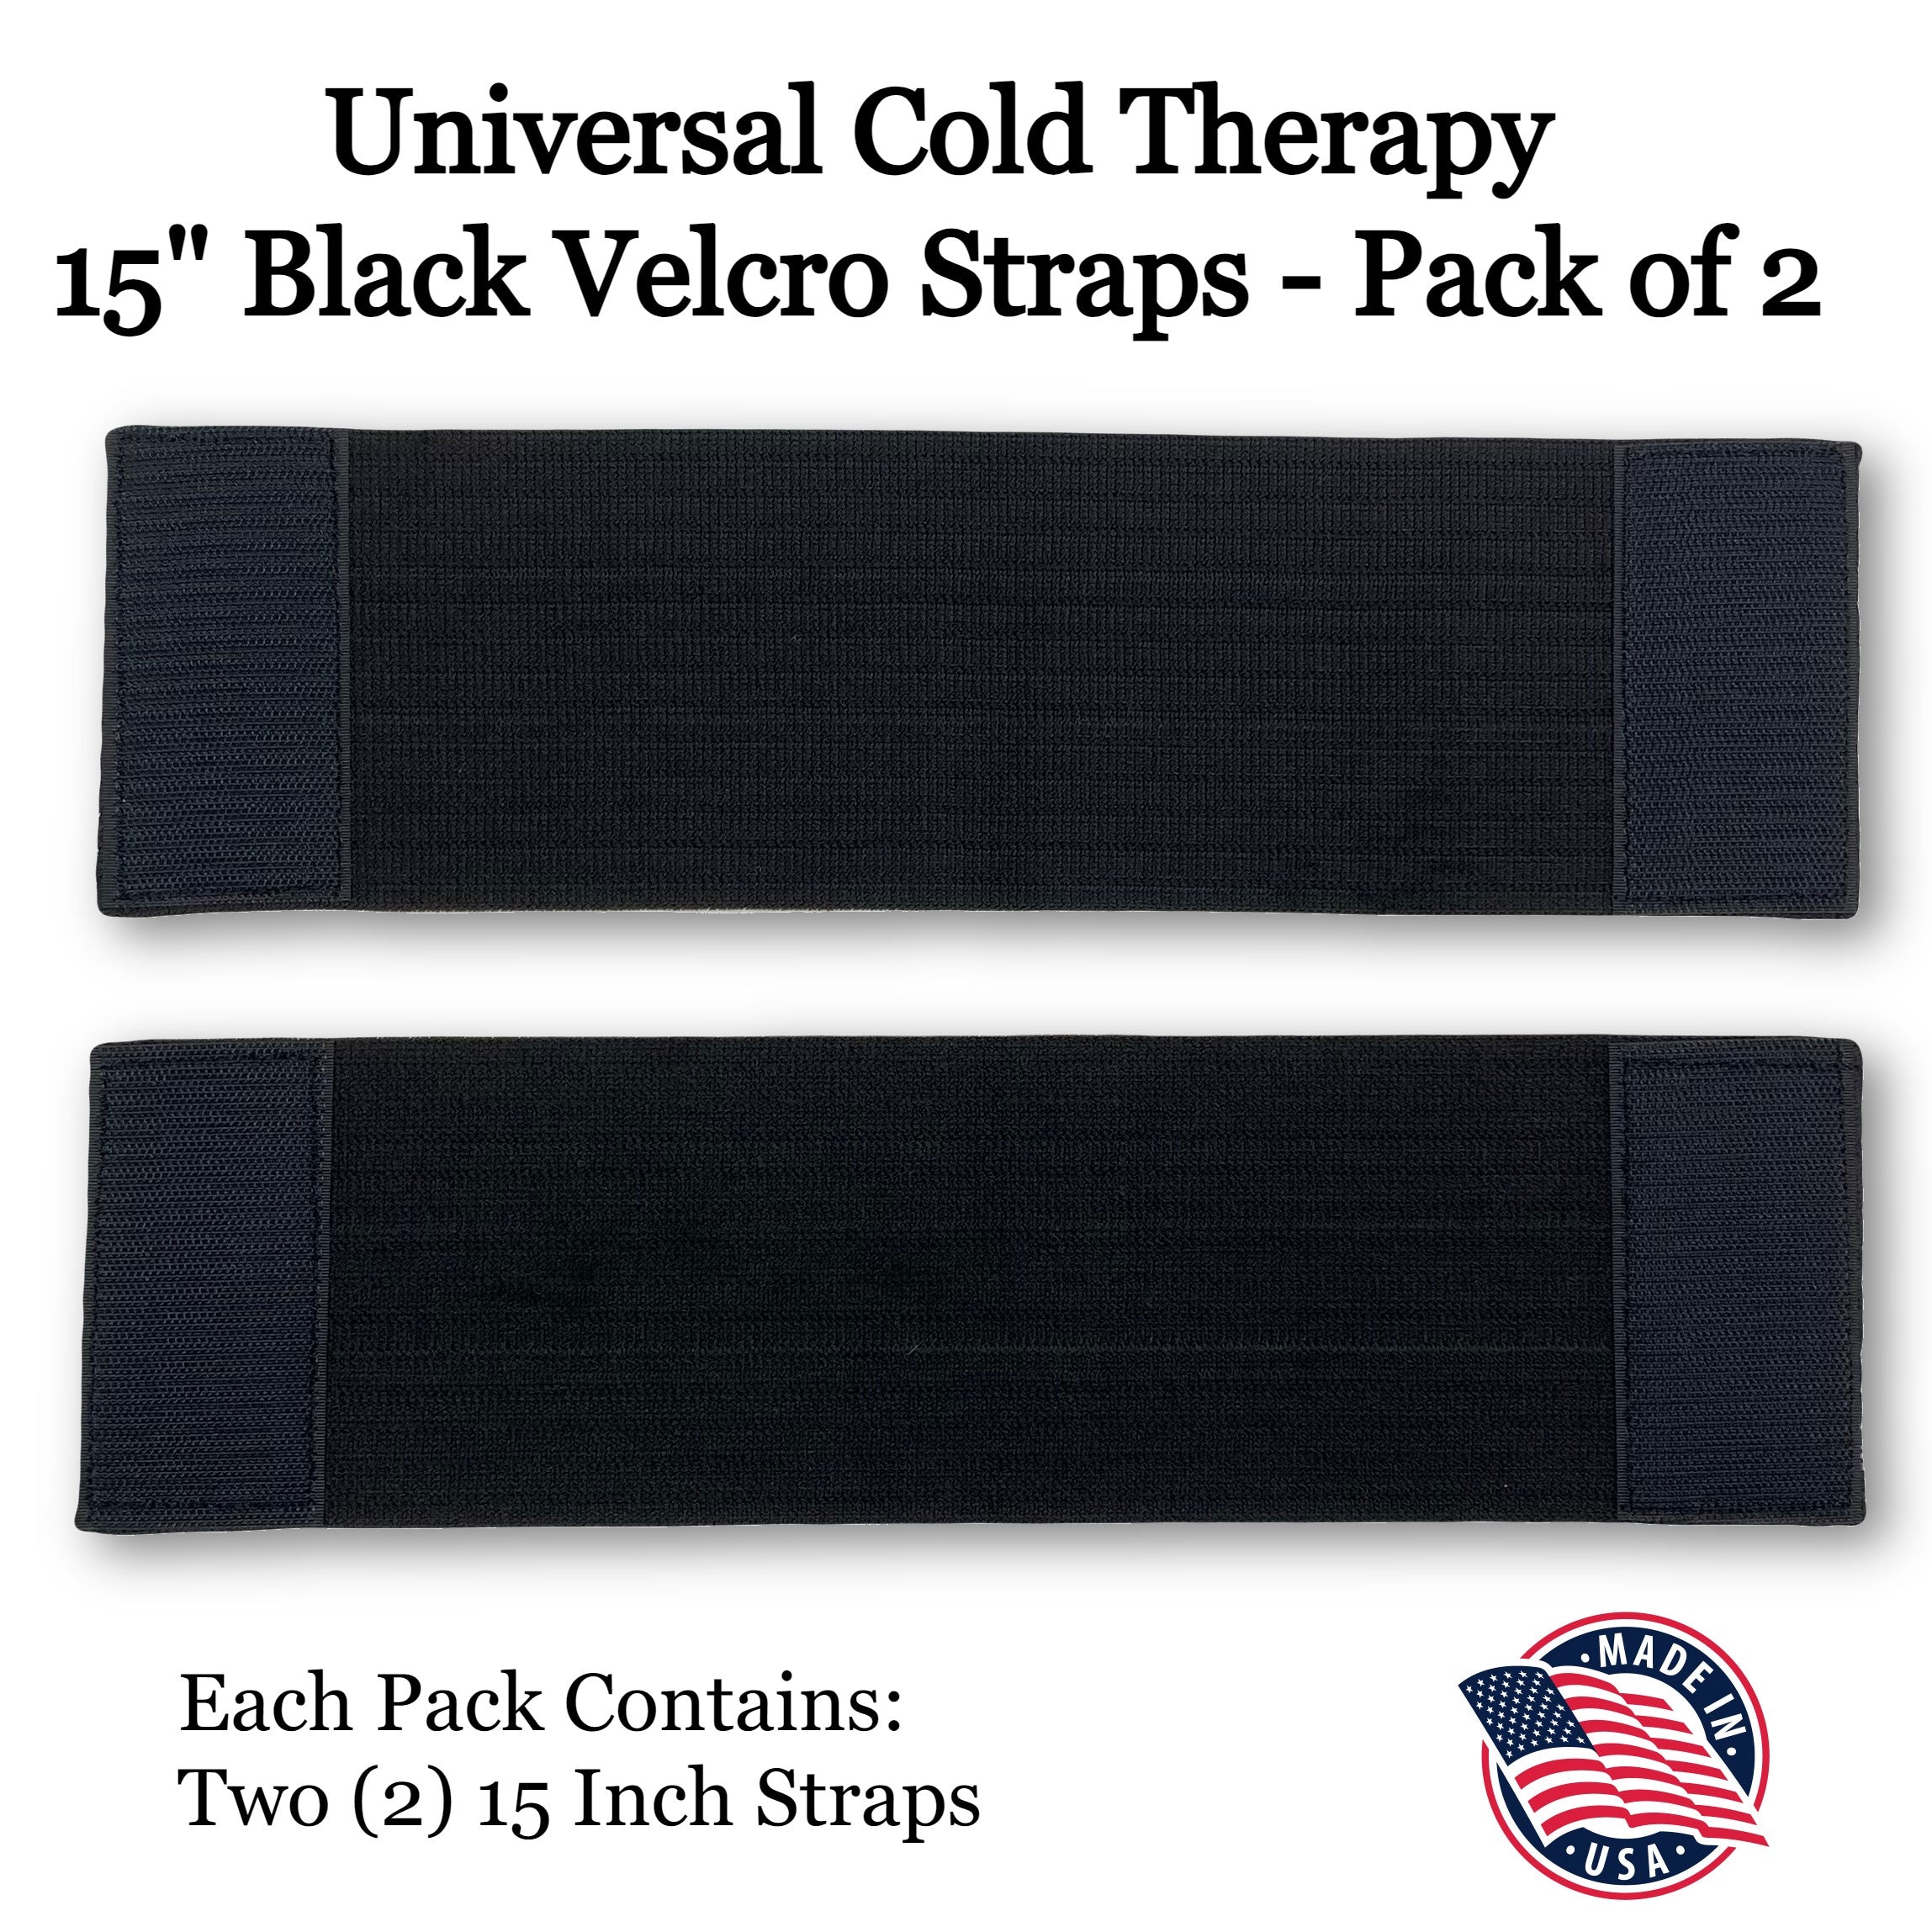 15 Inch Universal Cold Therapy Velcro Straps (2 Pack) - 15UNIVERSALSTRAP-2 15 Inch Universal Cold Therapy Velcro Straps (2 Pack) - undefined by Supply Physical Therapy Accessories, Accessory, Aircast Accessories, Best Seller, Breg, Breg Accessories, Breg Wave Accessories, Classic3 Accessories, Clear3 Accessories, Compression Straps, DonJoy, Ossur, Replacement, Straps, Wraps